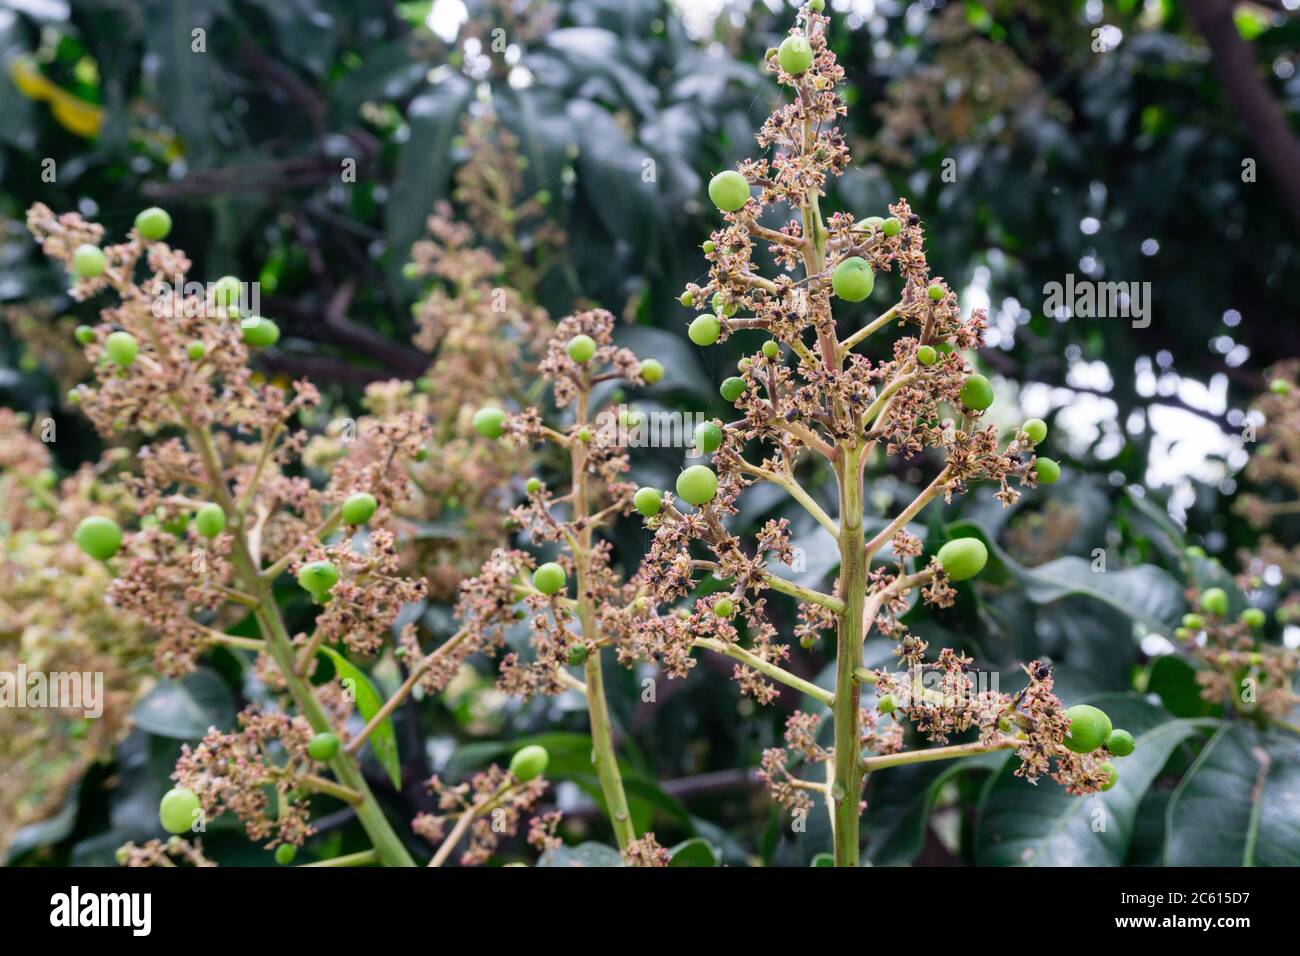 Mangifera indica commonly known as mango. A shot of fruit bearing tree with small mangoes and its flowers. Stock Photo